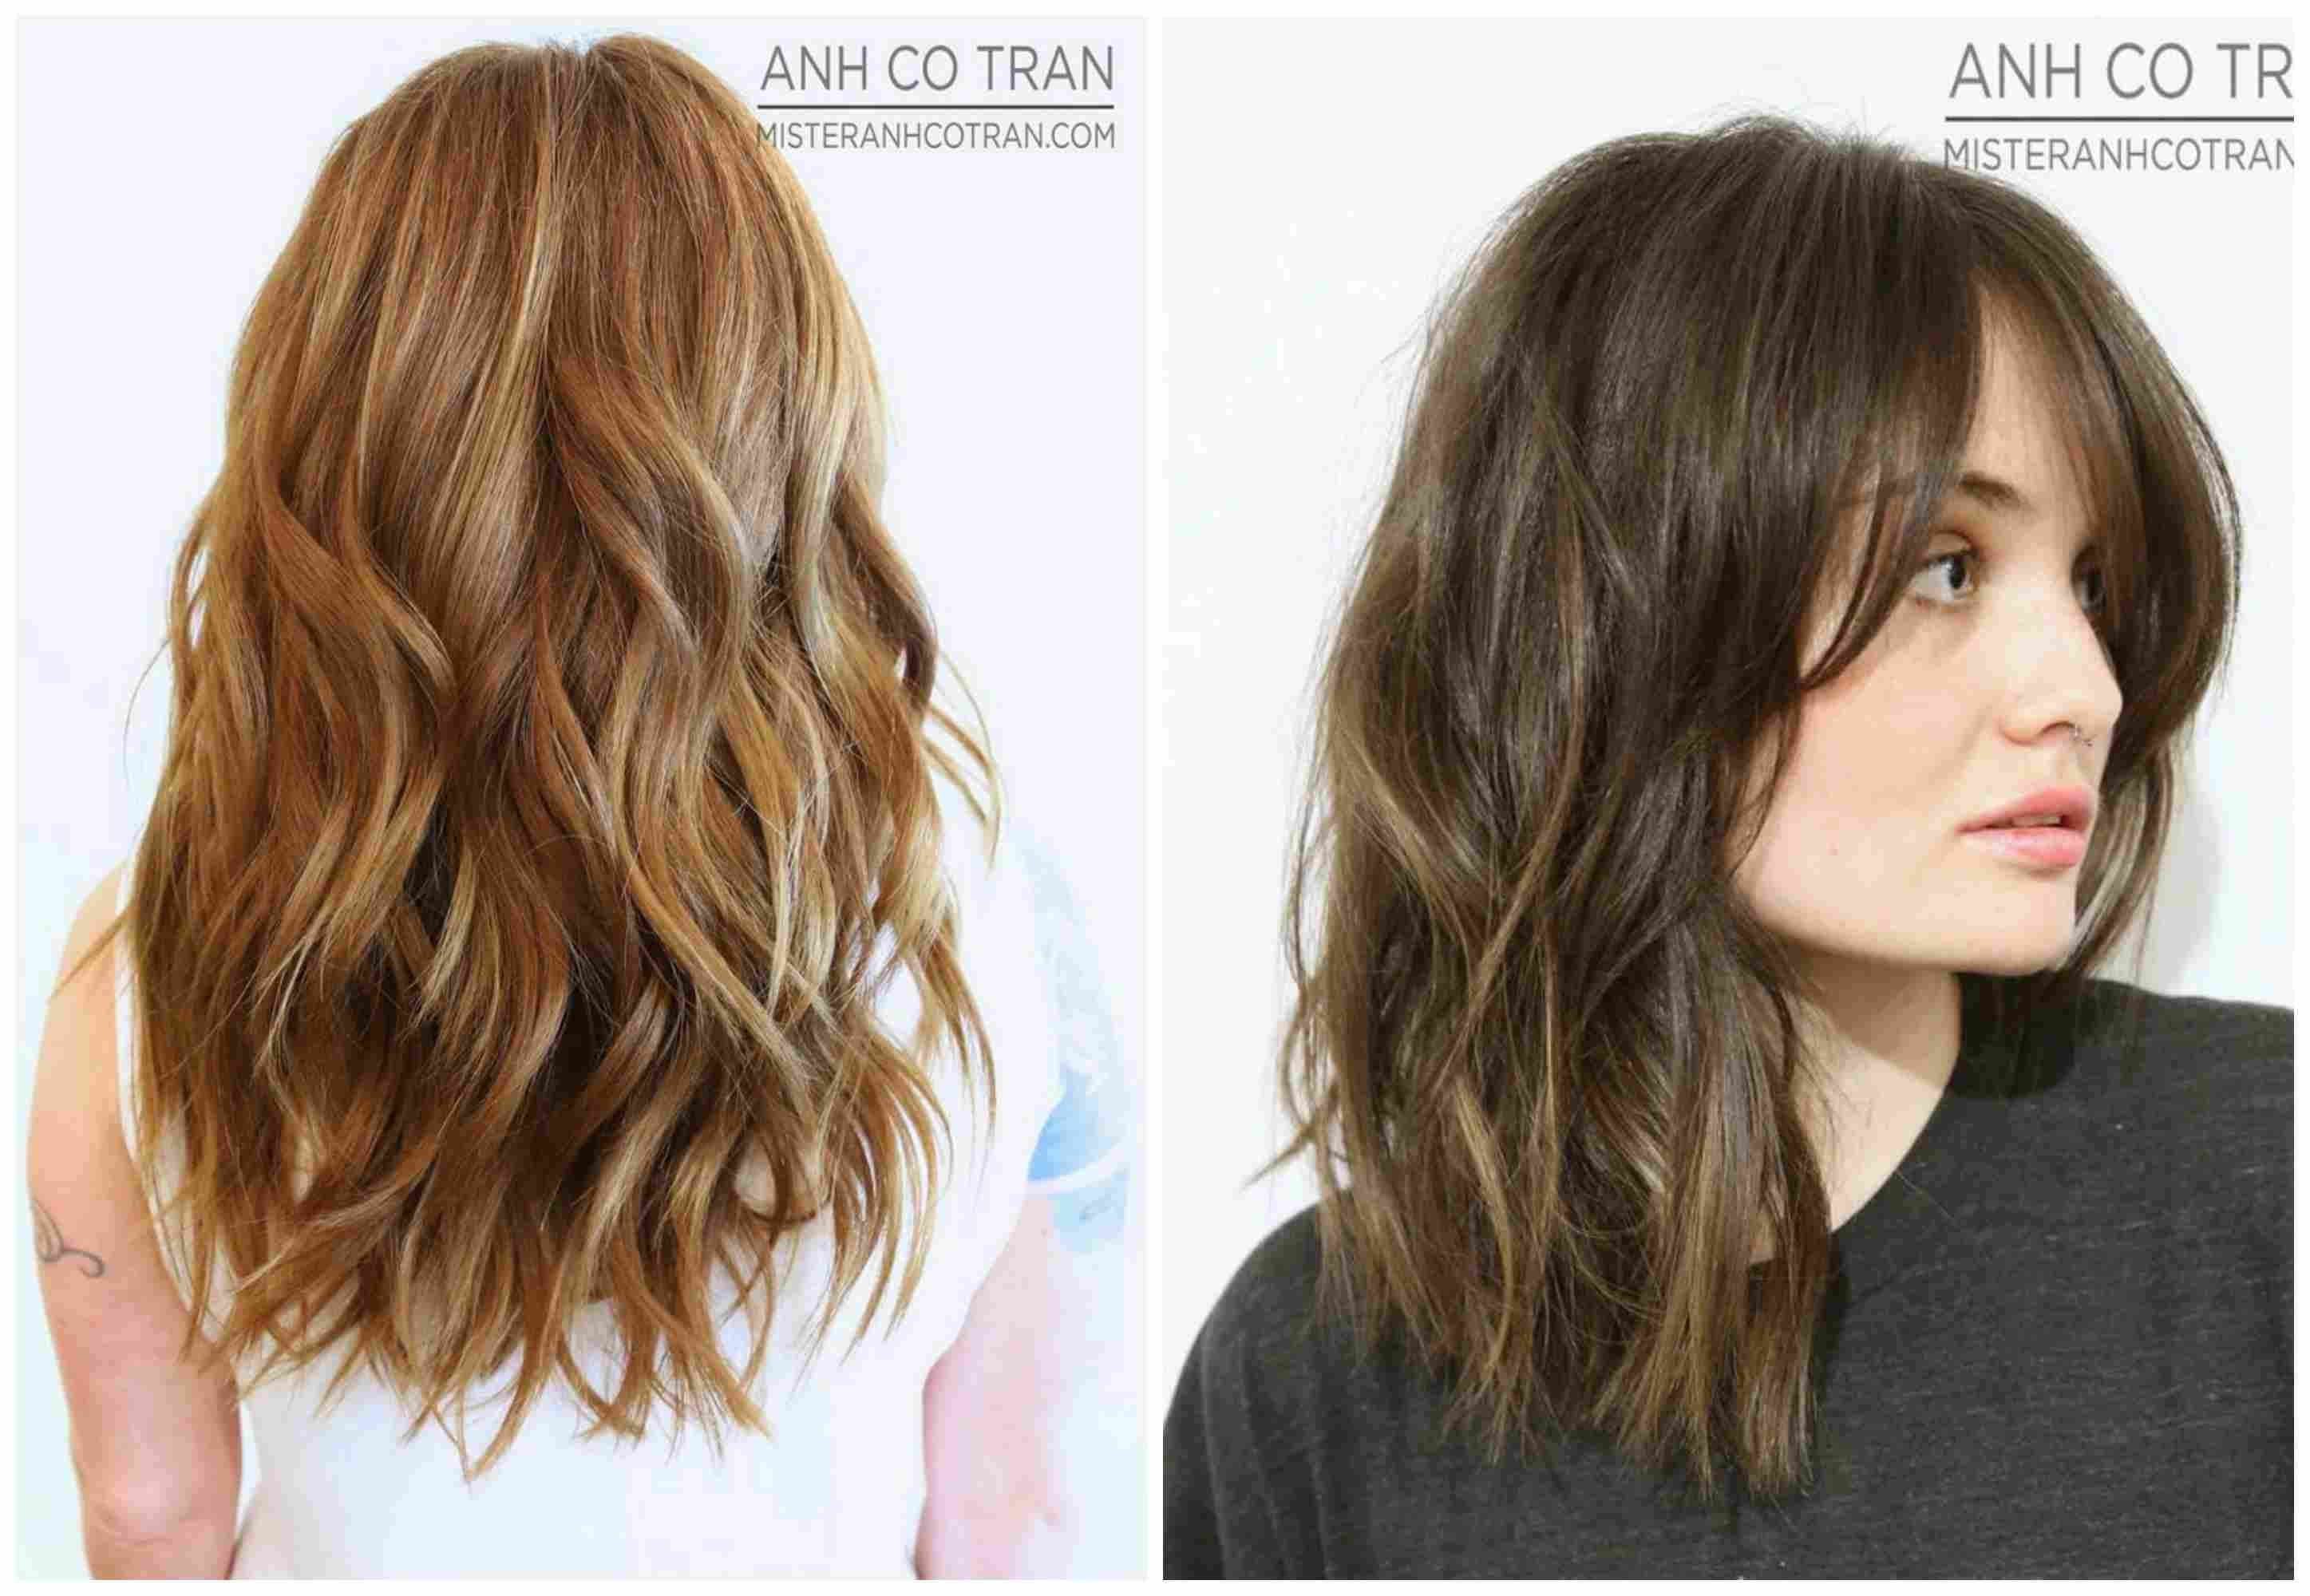 Long Wavy Hair: The Best Cuts, Colors And Styles inside Hairstyle Fit For Wavy Hair